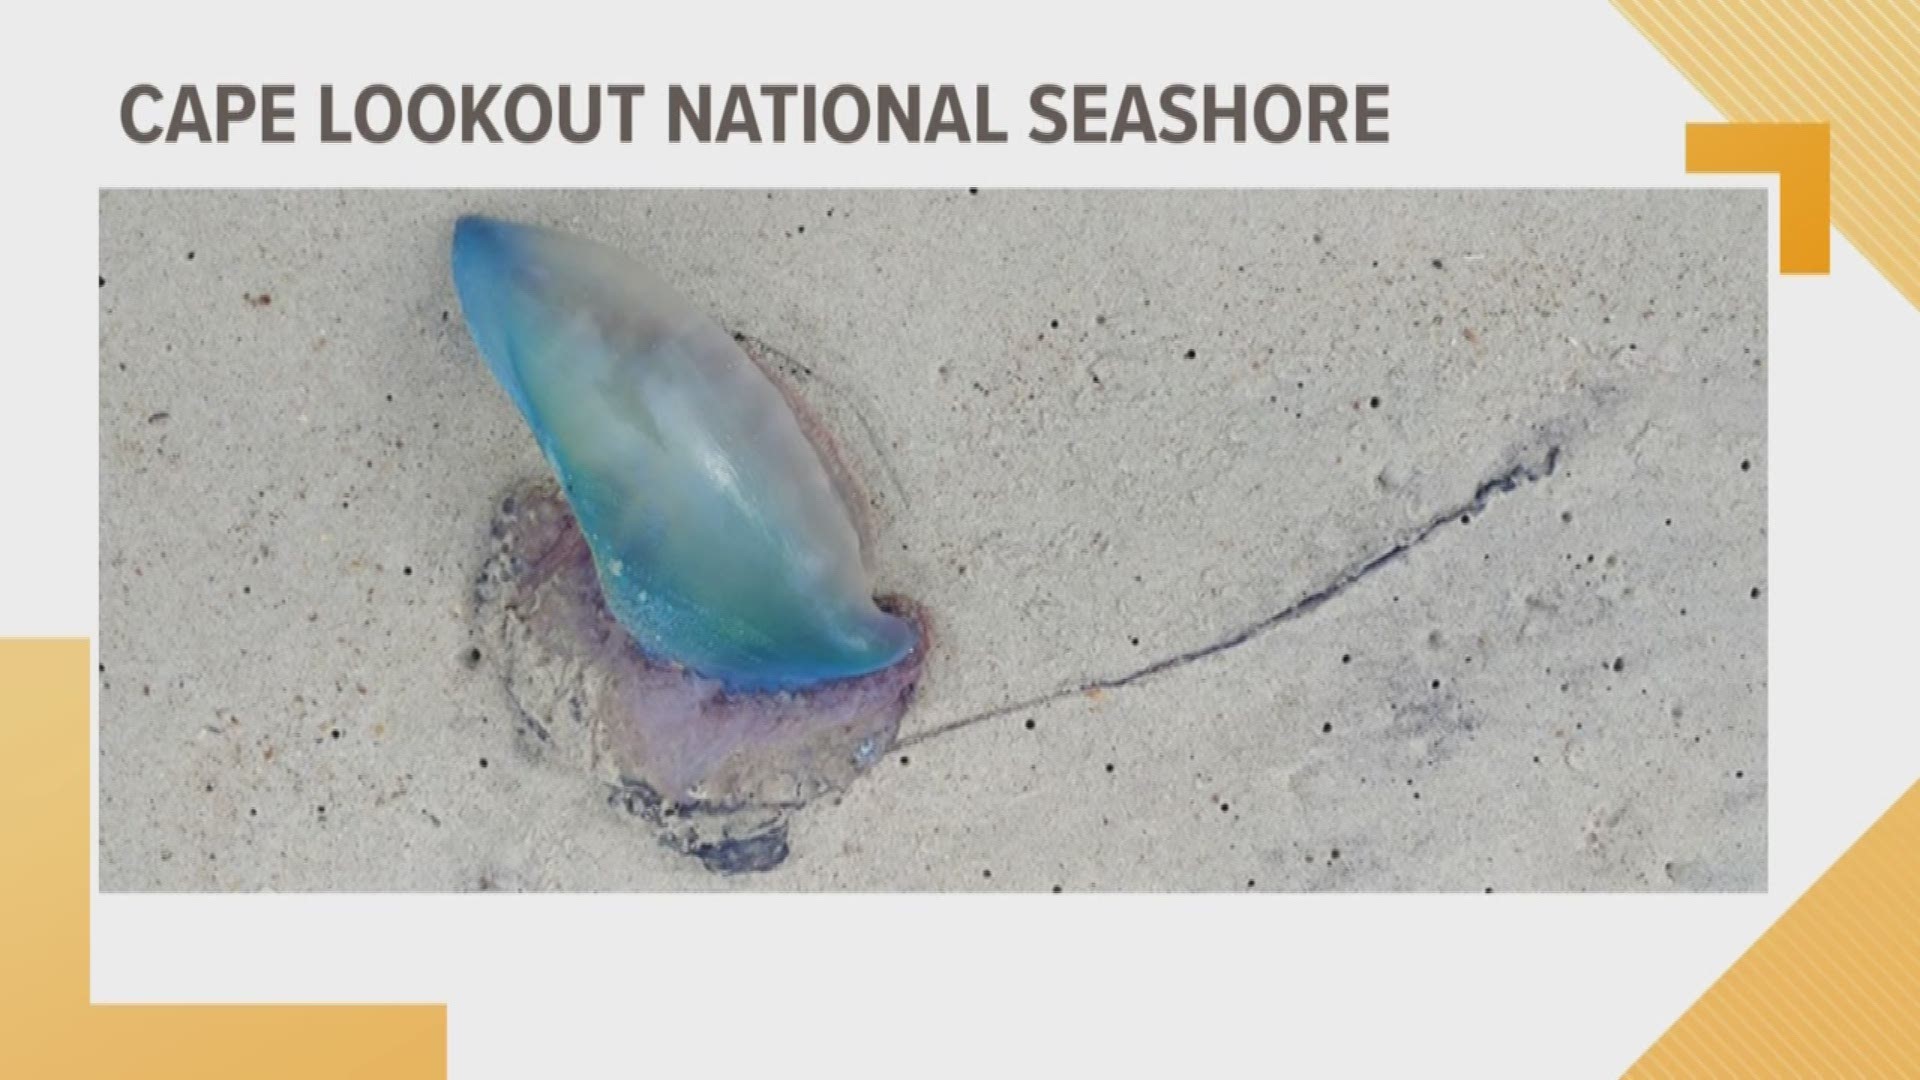 The first Portuguese Man-o-war of the 2019 season washed ashore.